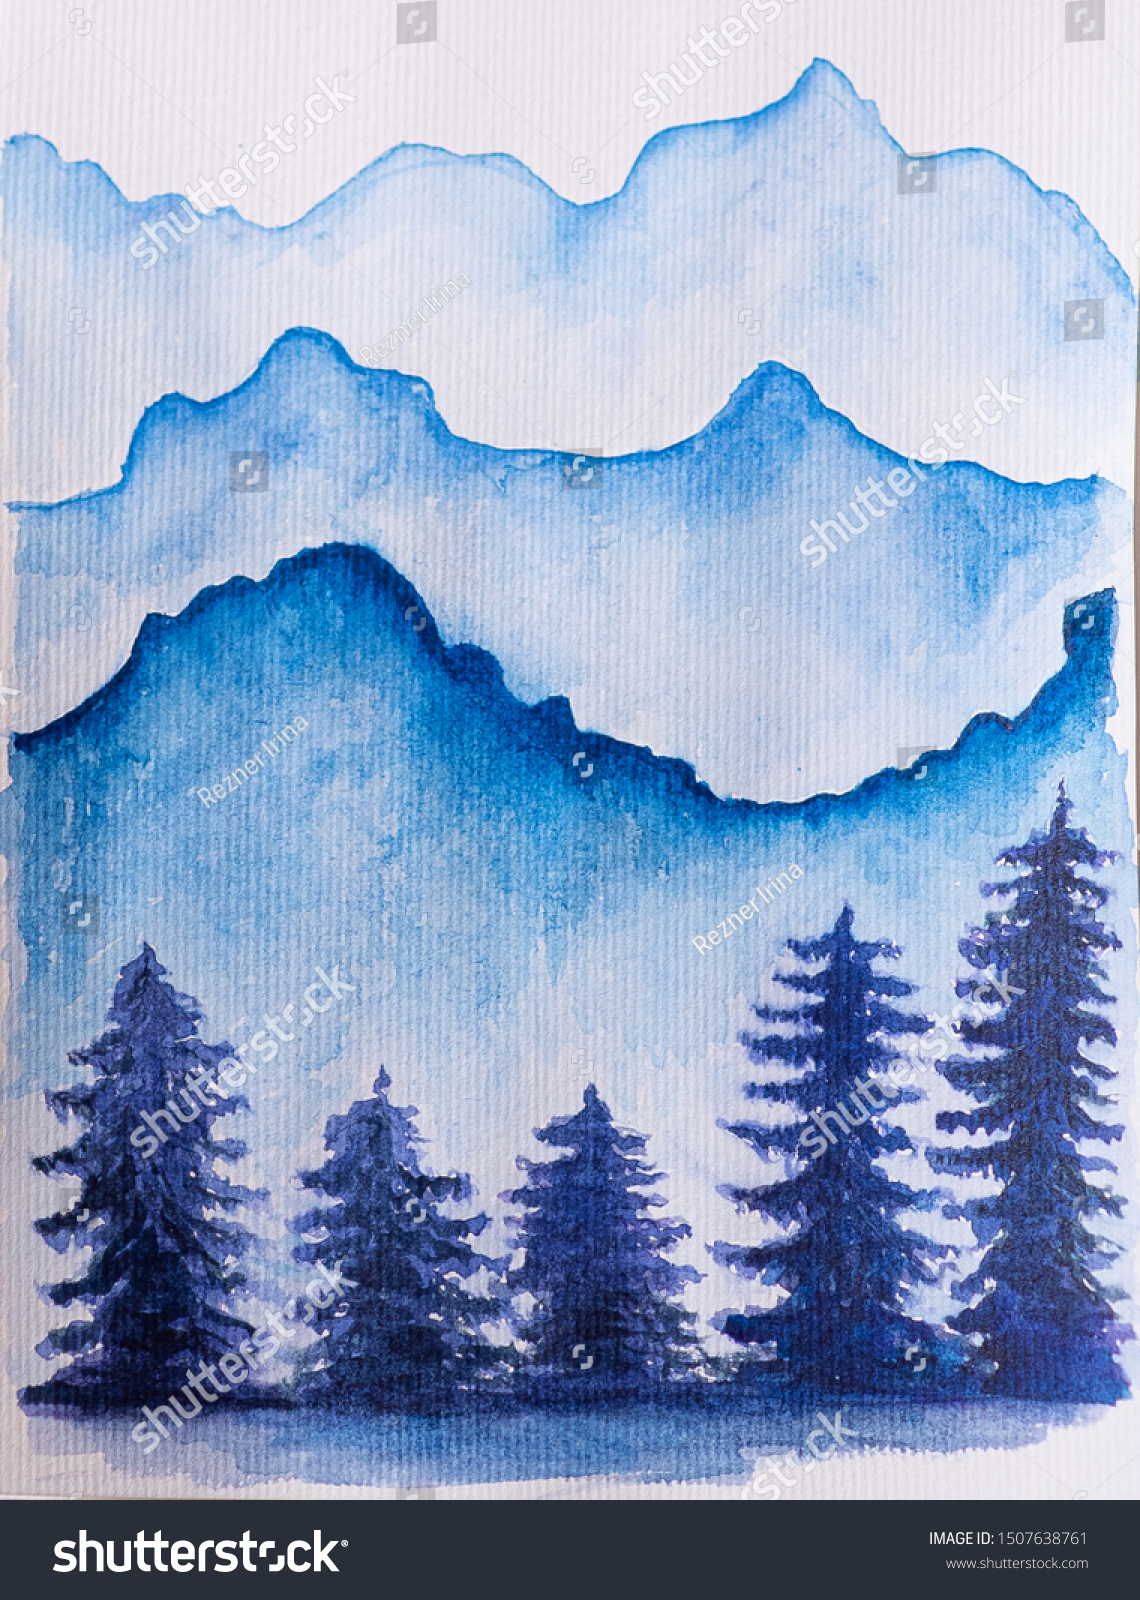 Drawing Watercolor Landscape Mountains Trees Blue Stock Photo Edit Now 1507638761 If you have paints markers crayons or colored pencils handy you can use these to shade your finished drawing. https www shutterstock com image photo drawing watercolor landscape mountains trees blue 1507638761